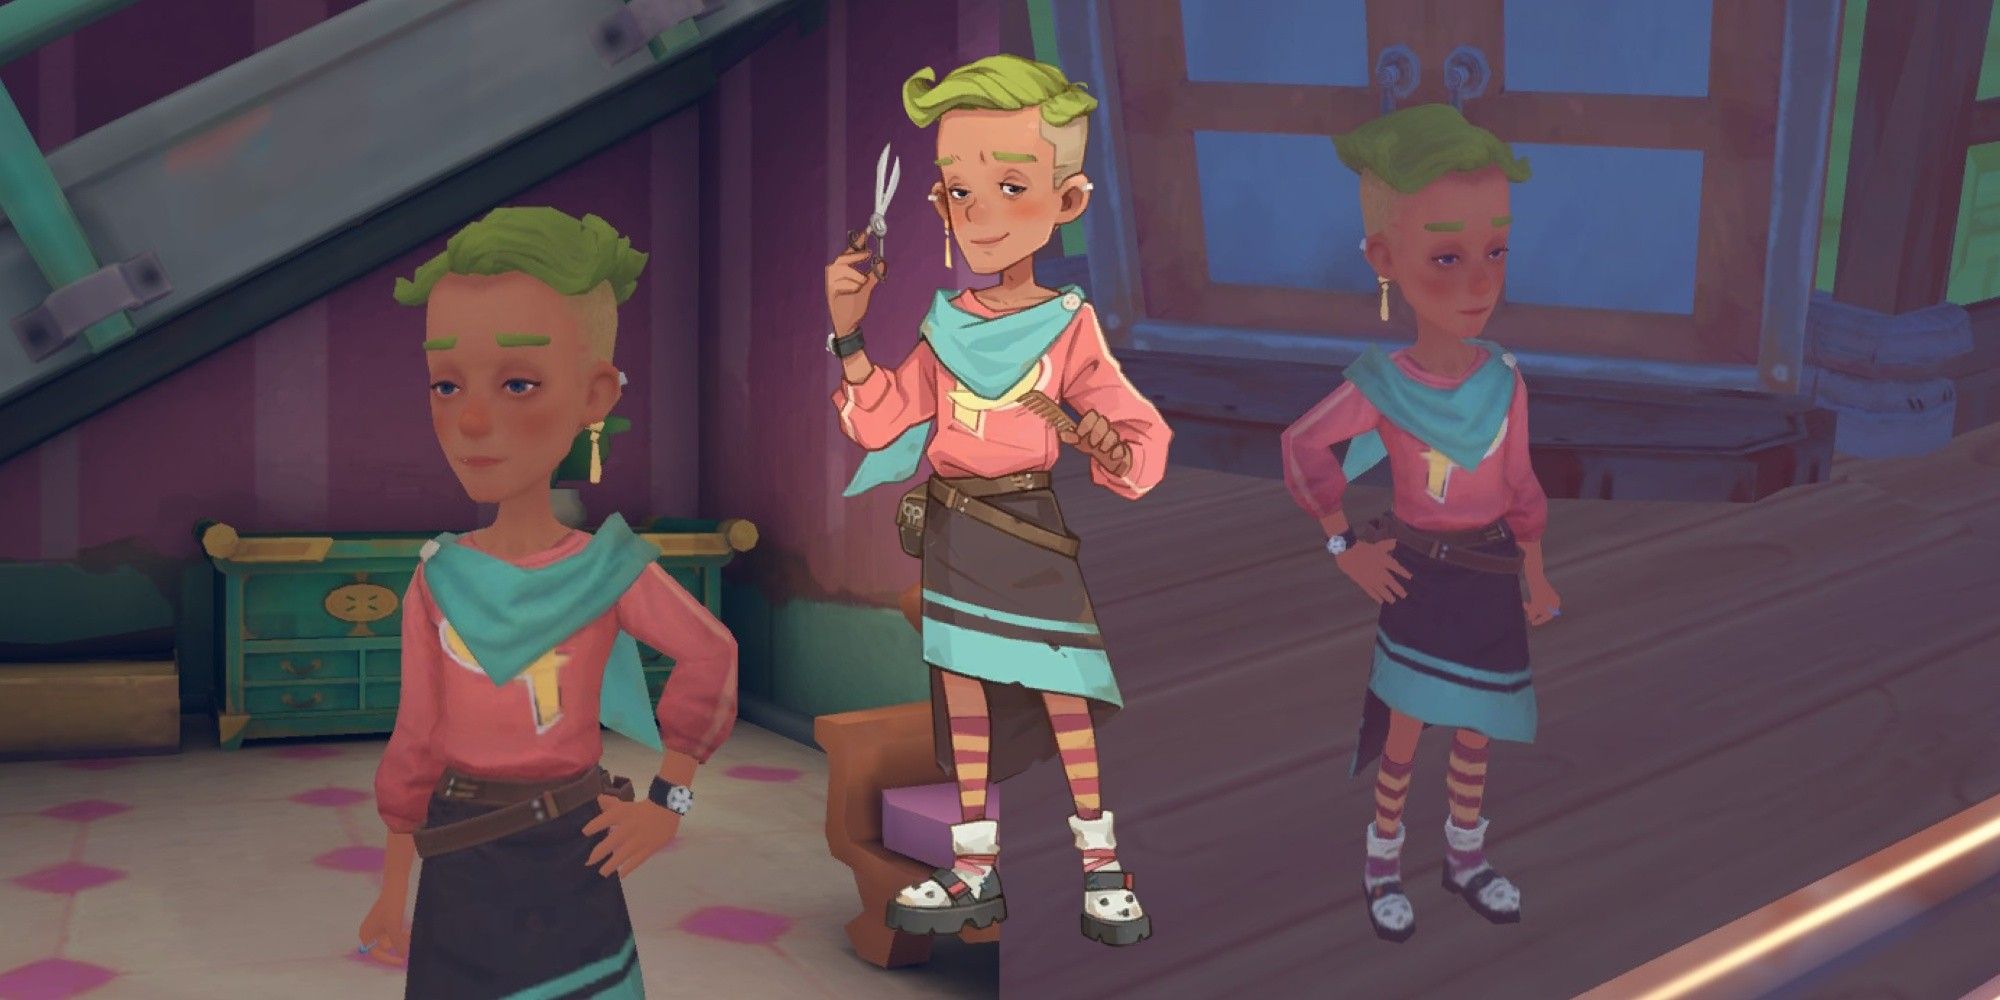 My Time in Sandrock is a deeper, dryer take on its Portia